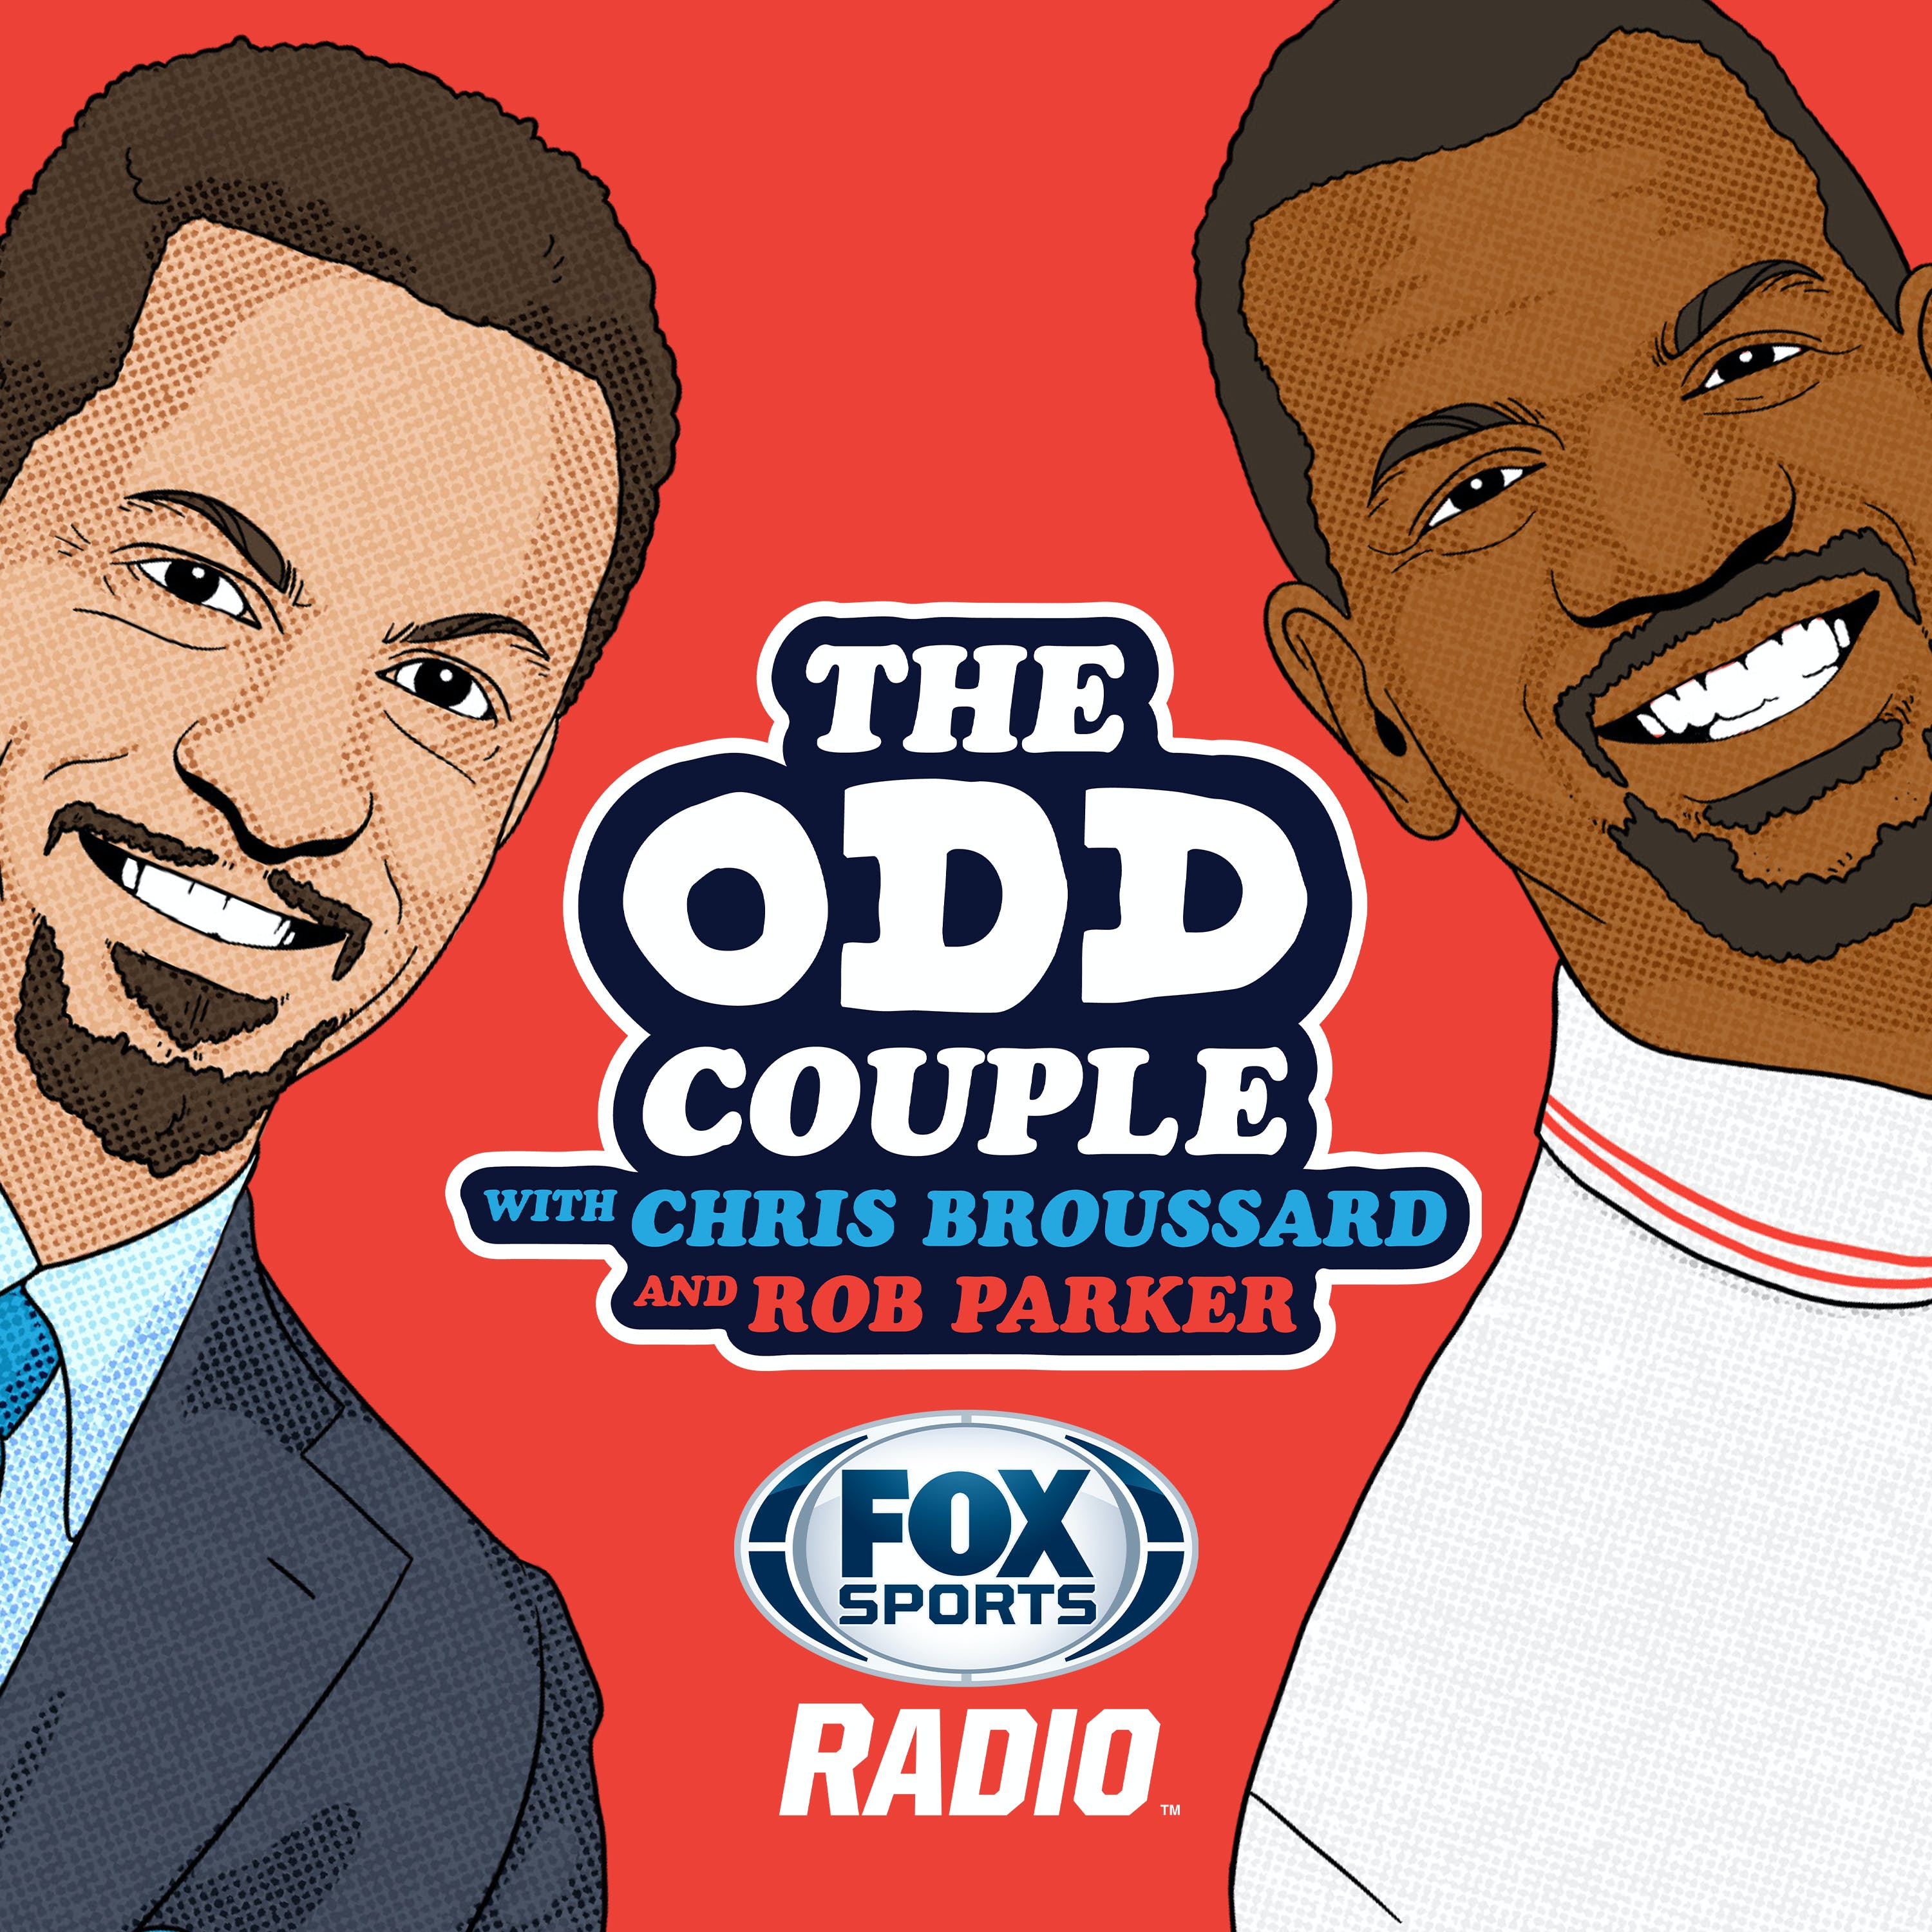 11/10/2021 - Best of The Odd Couple